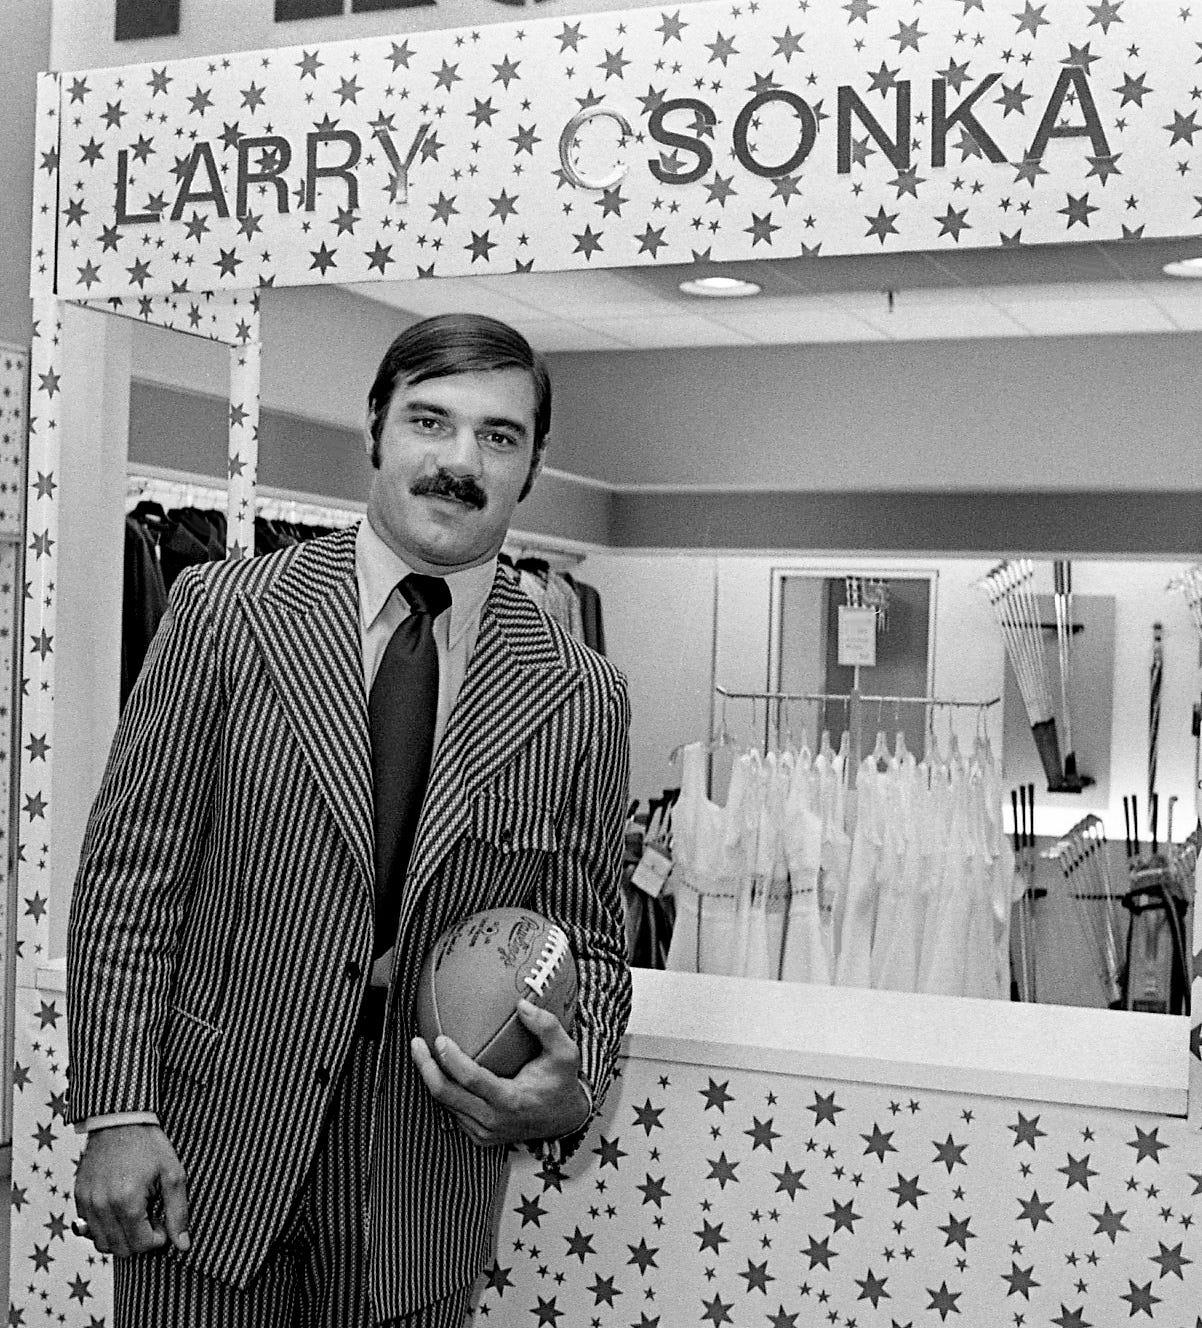 Miami Dolphins star running back Larry Csonka makes an appearance at the J.C. Penny store at RiverGate Mall in Nashville on June 9, 1972. Csonka gained 1,051 yards last year and help lead the Dolphins to the Super Bowl where they lost to the Dallas Cowboys.